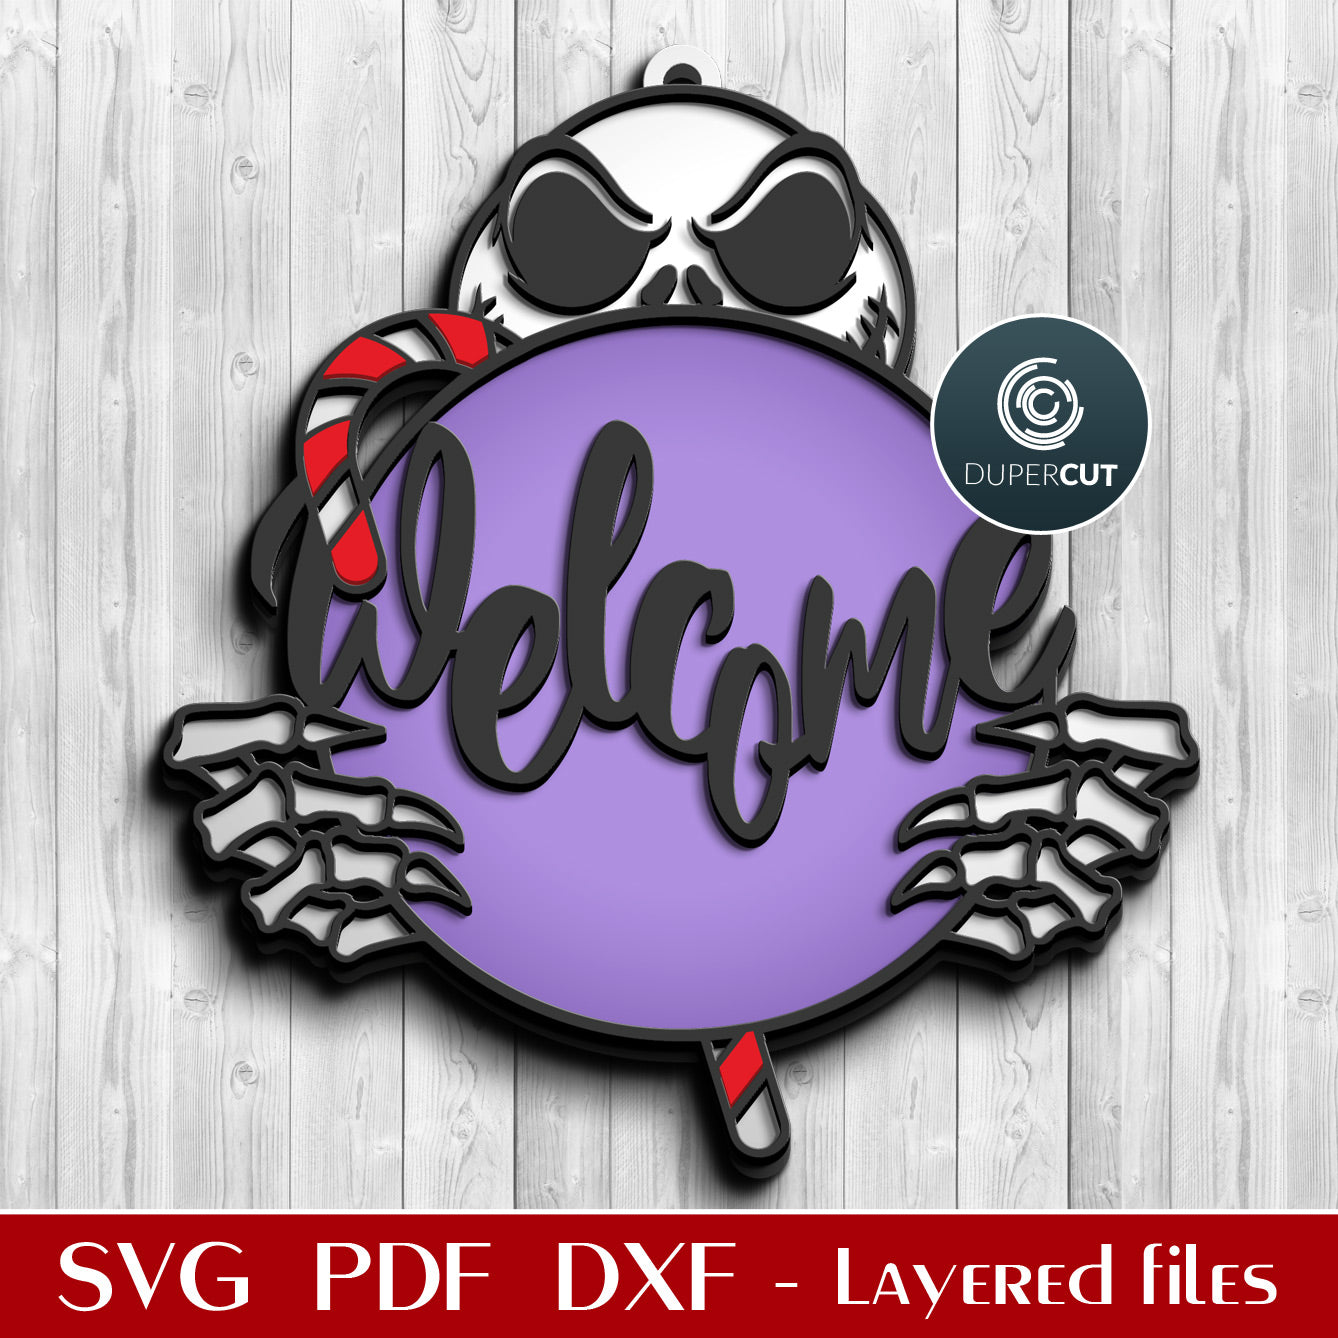 Jack Skellington door hanger welcome sign - SVG DXF laser cutting pattern files for scroll saw, Glowforge, Cricut, Silhouette cameo, CNC plasma machines by DuperCut